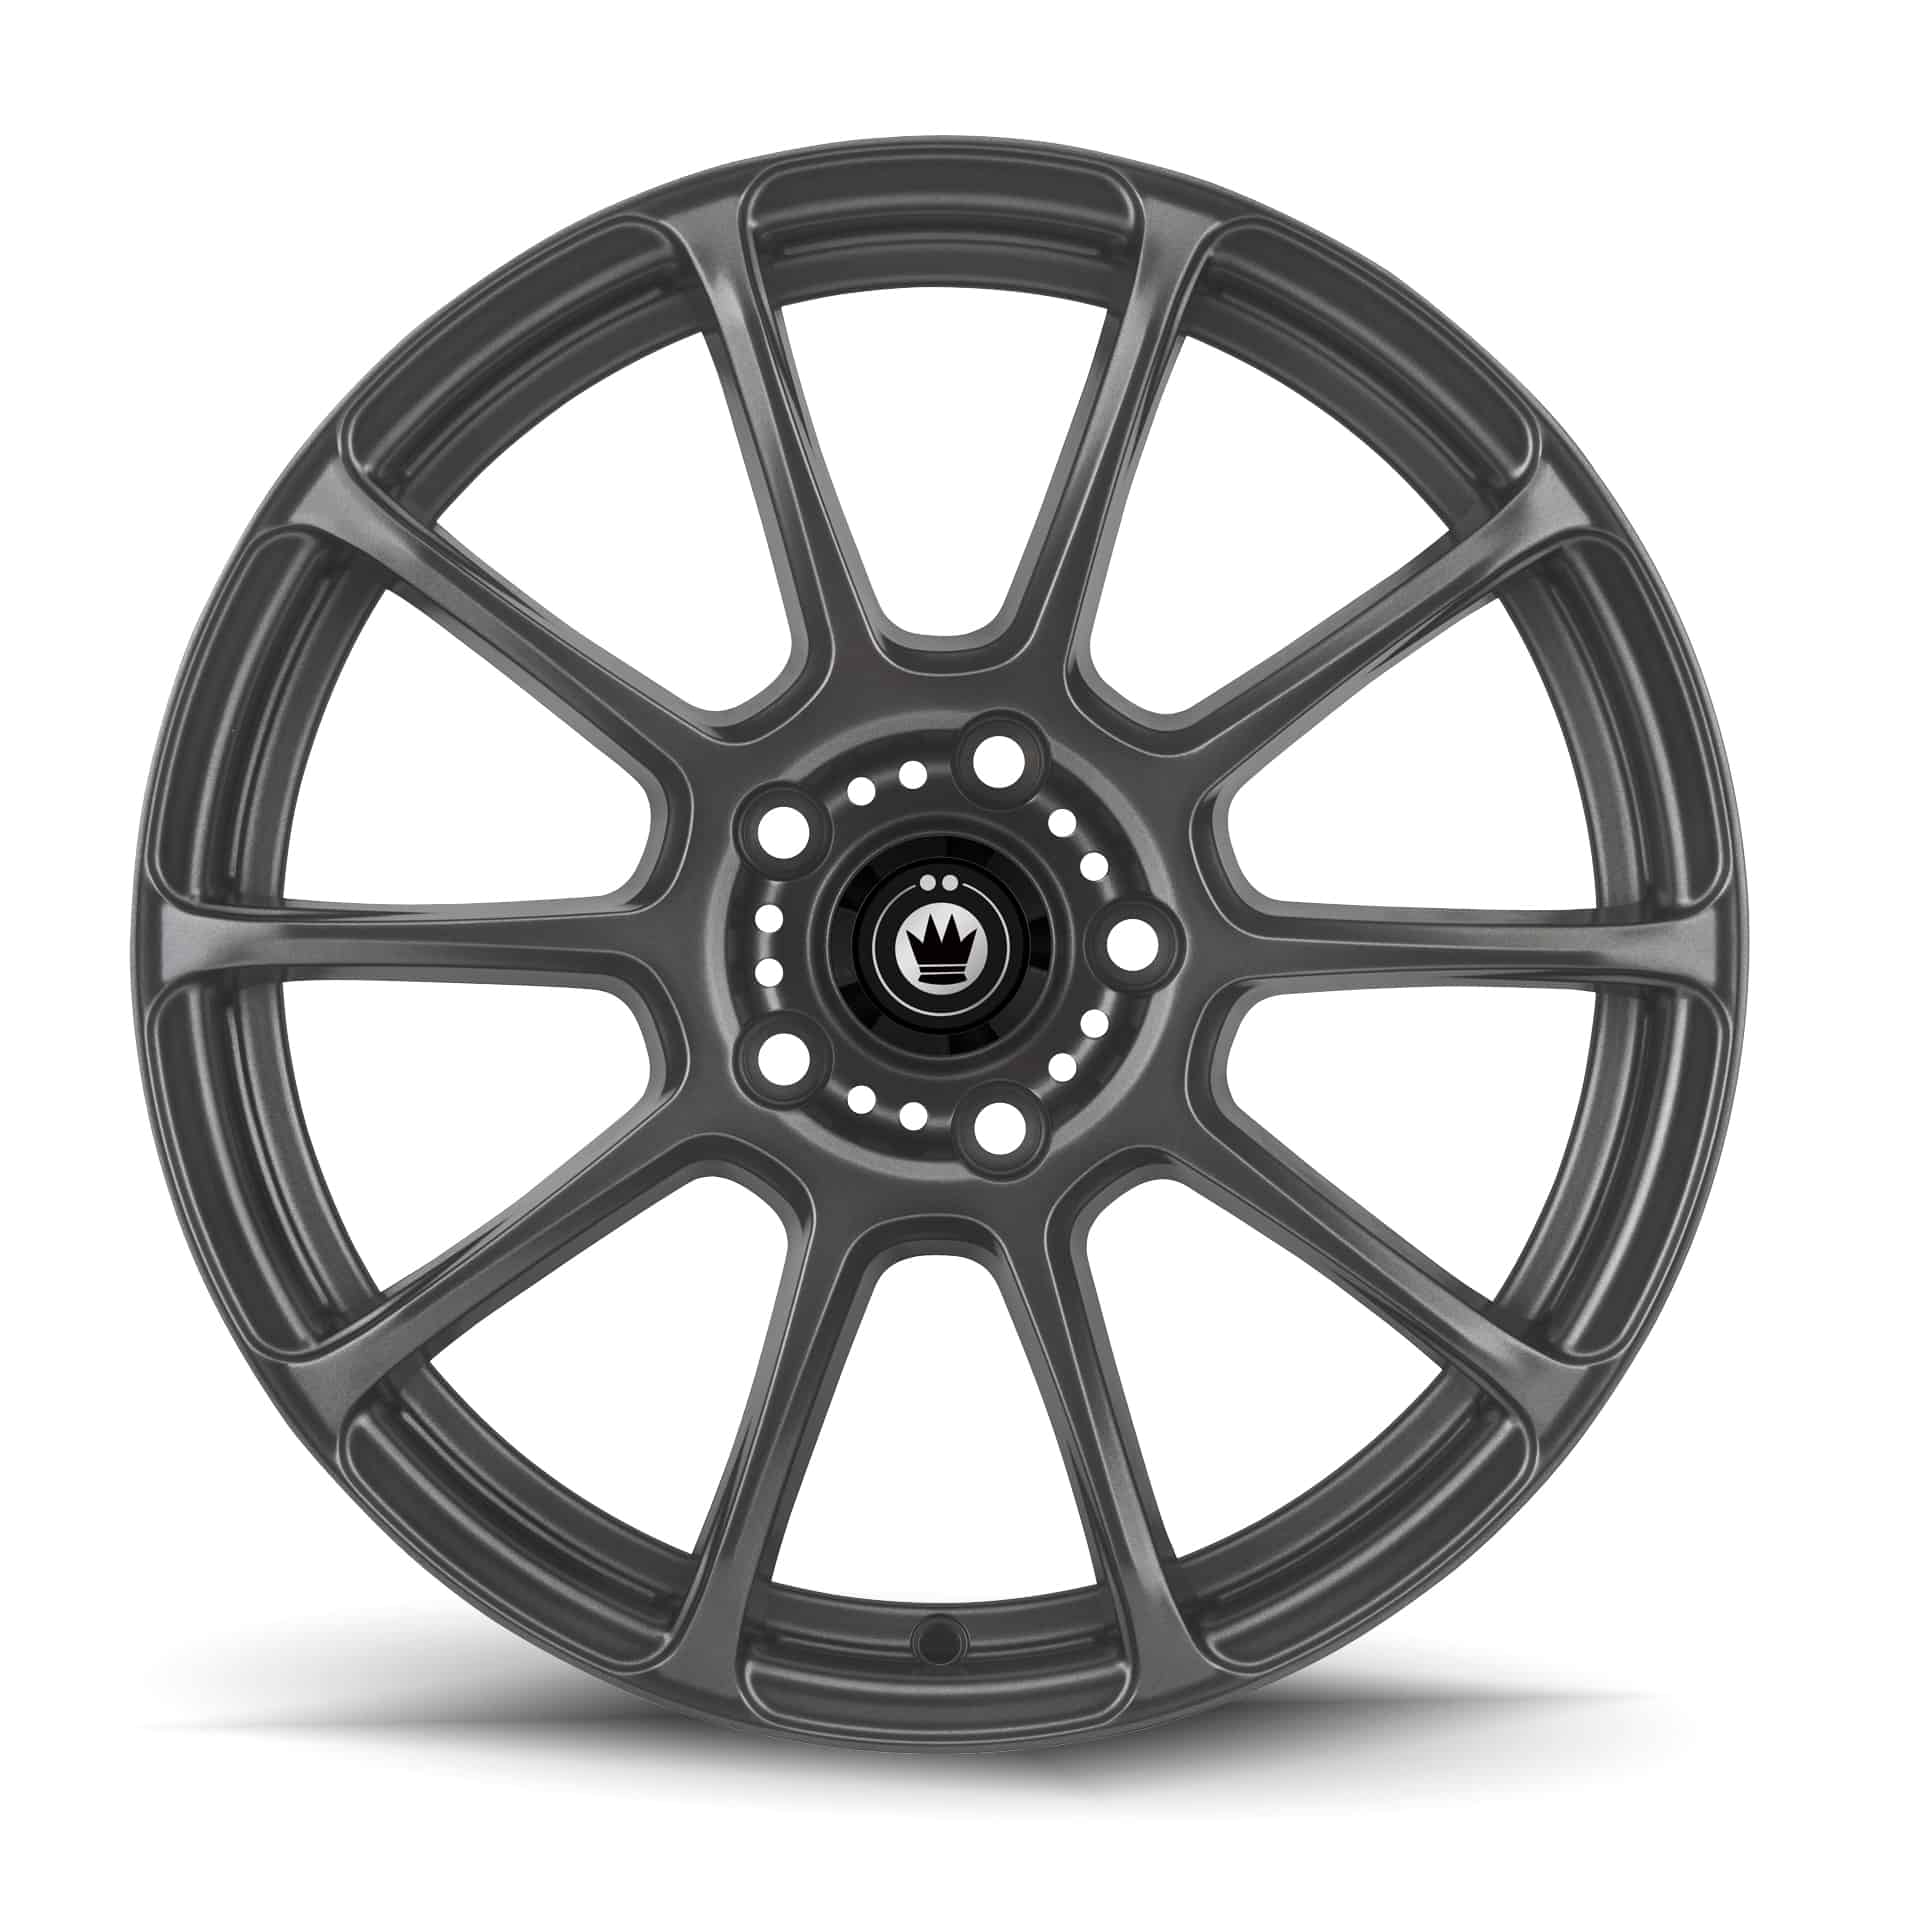 17 x 7.5 inches /4 x 100 mm, 45 mm Offset Konig RUNLITE Matte Black Wheel with Painted Finish 